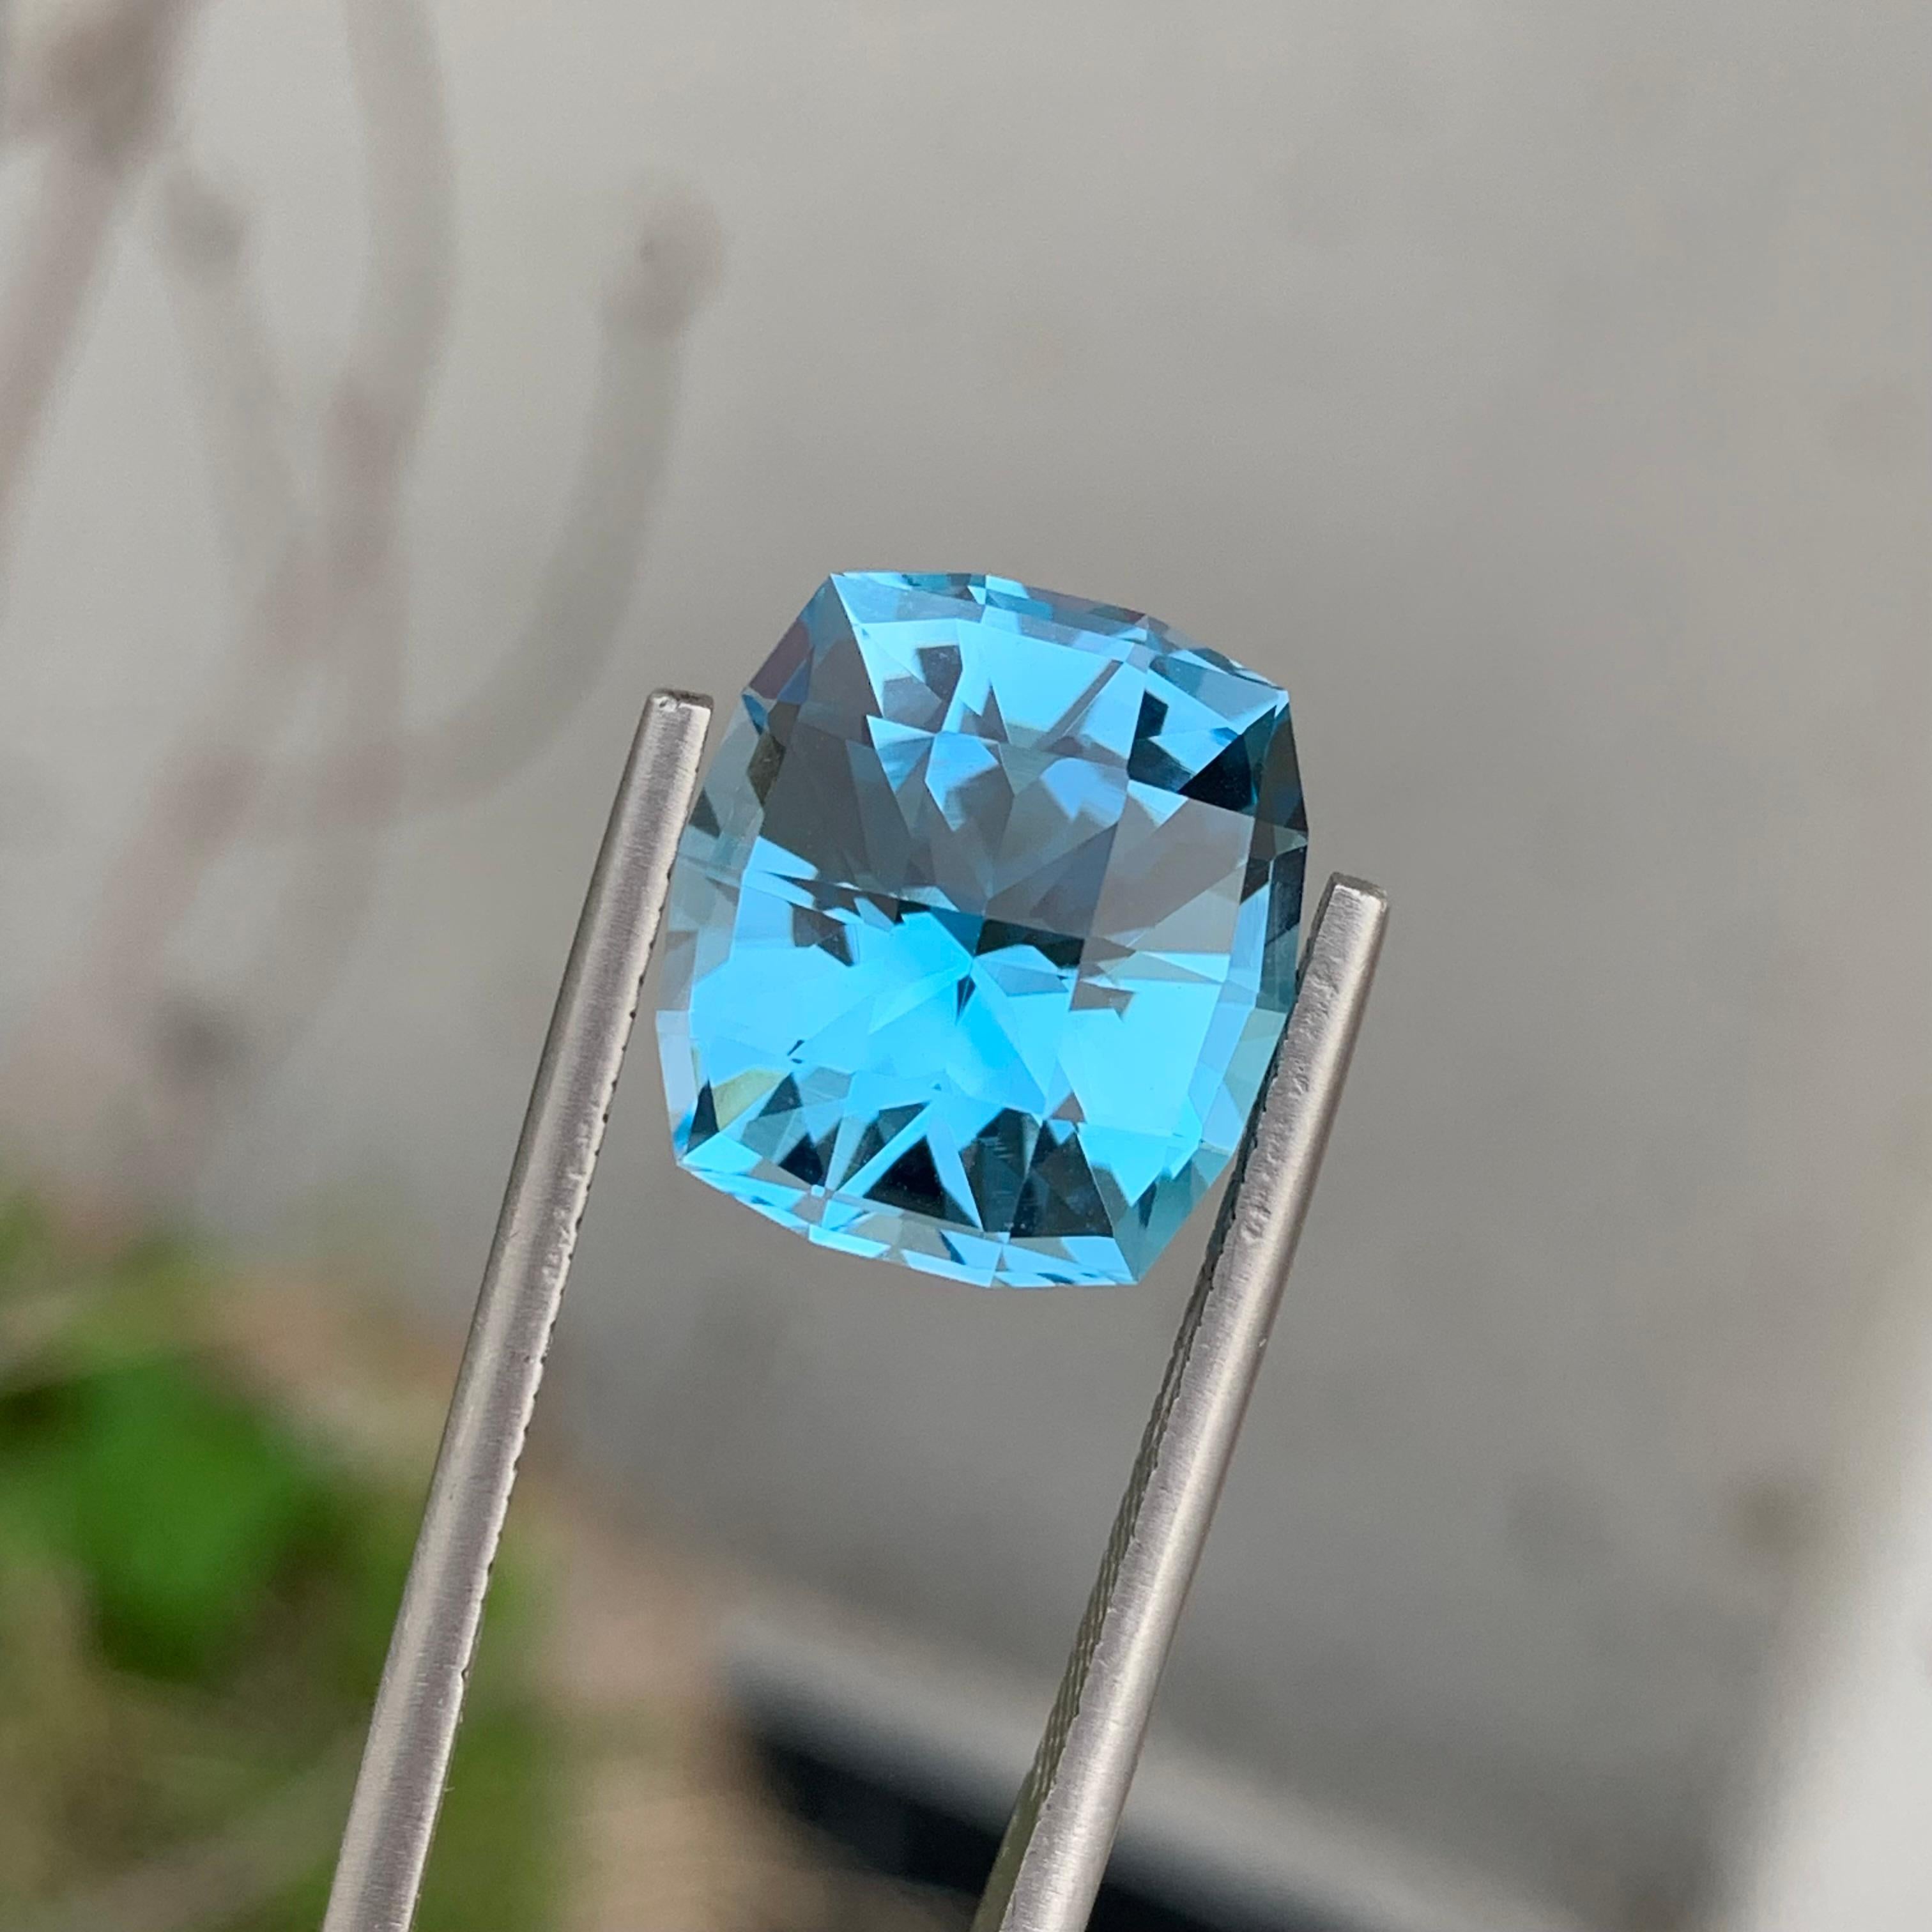 Arts and Crafts 12.15 Carat Fancy Cut Faceted Sky Blue Topaz Gemstone For Jewellery Making  For Sale